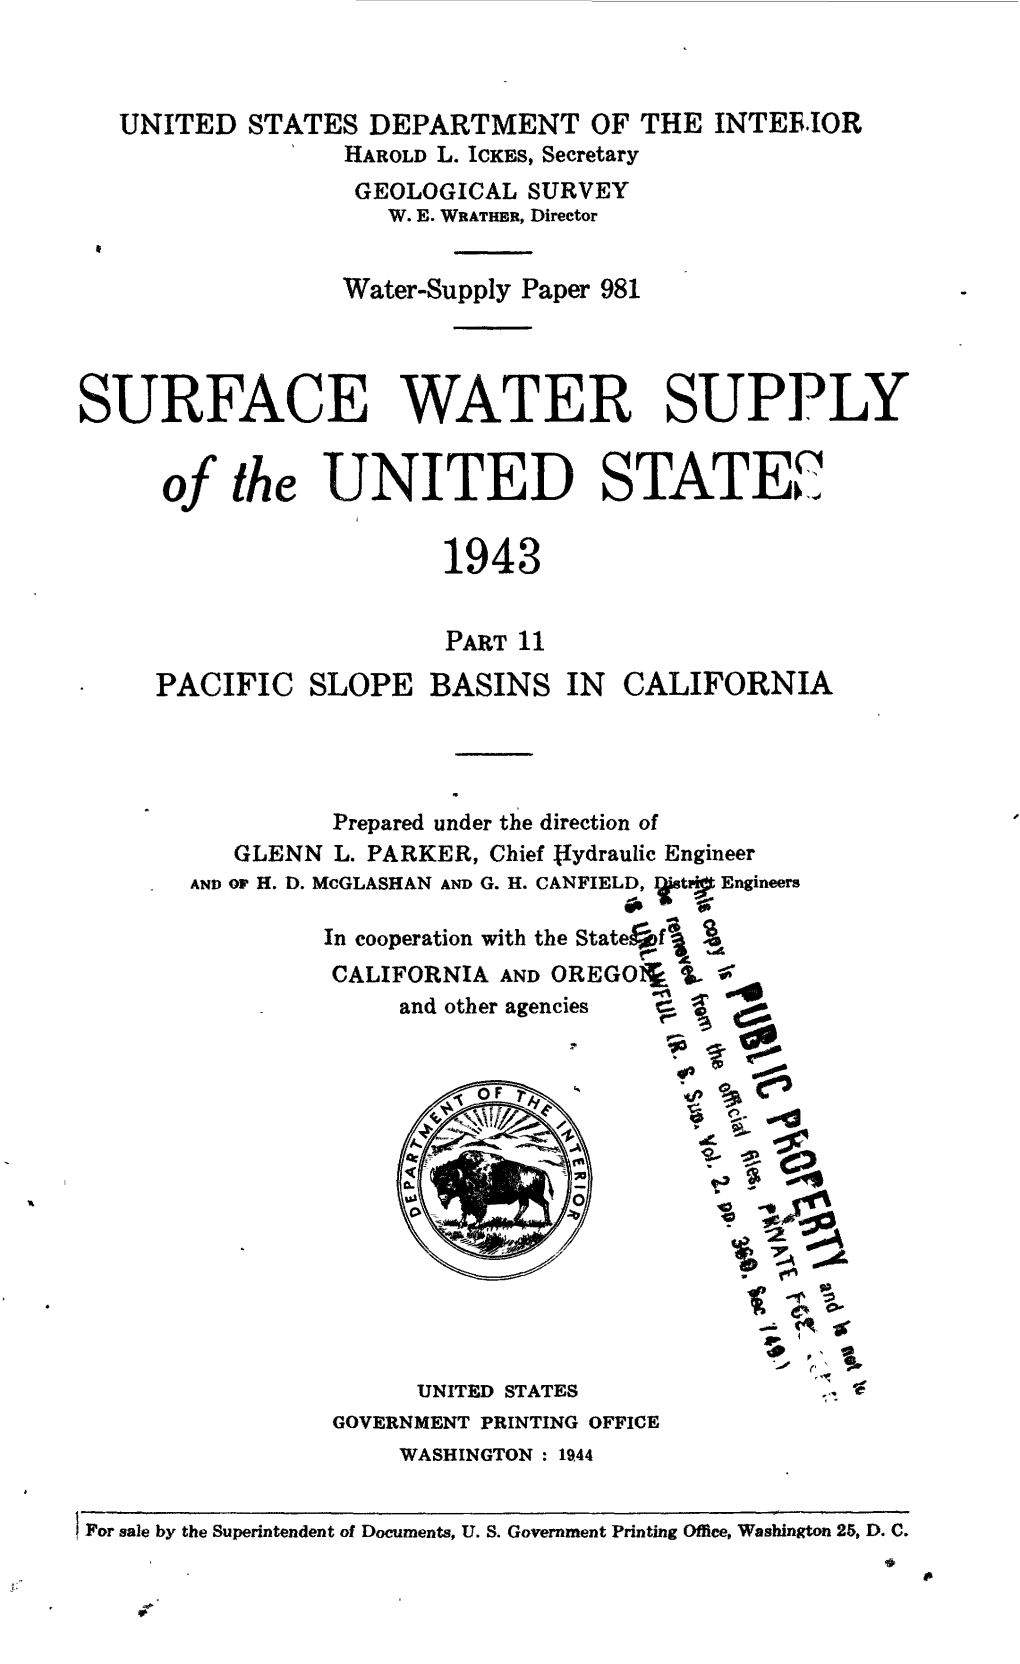 SURFACE WATER SUPPLY of the UNITED STATES 1943